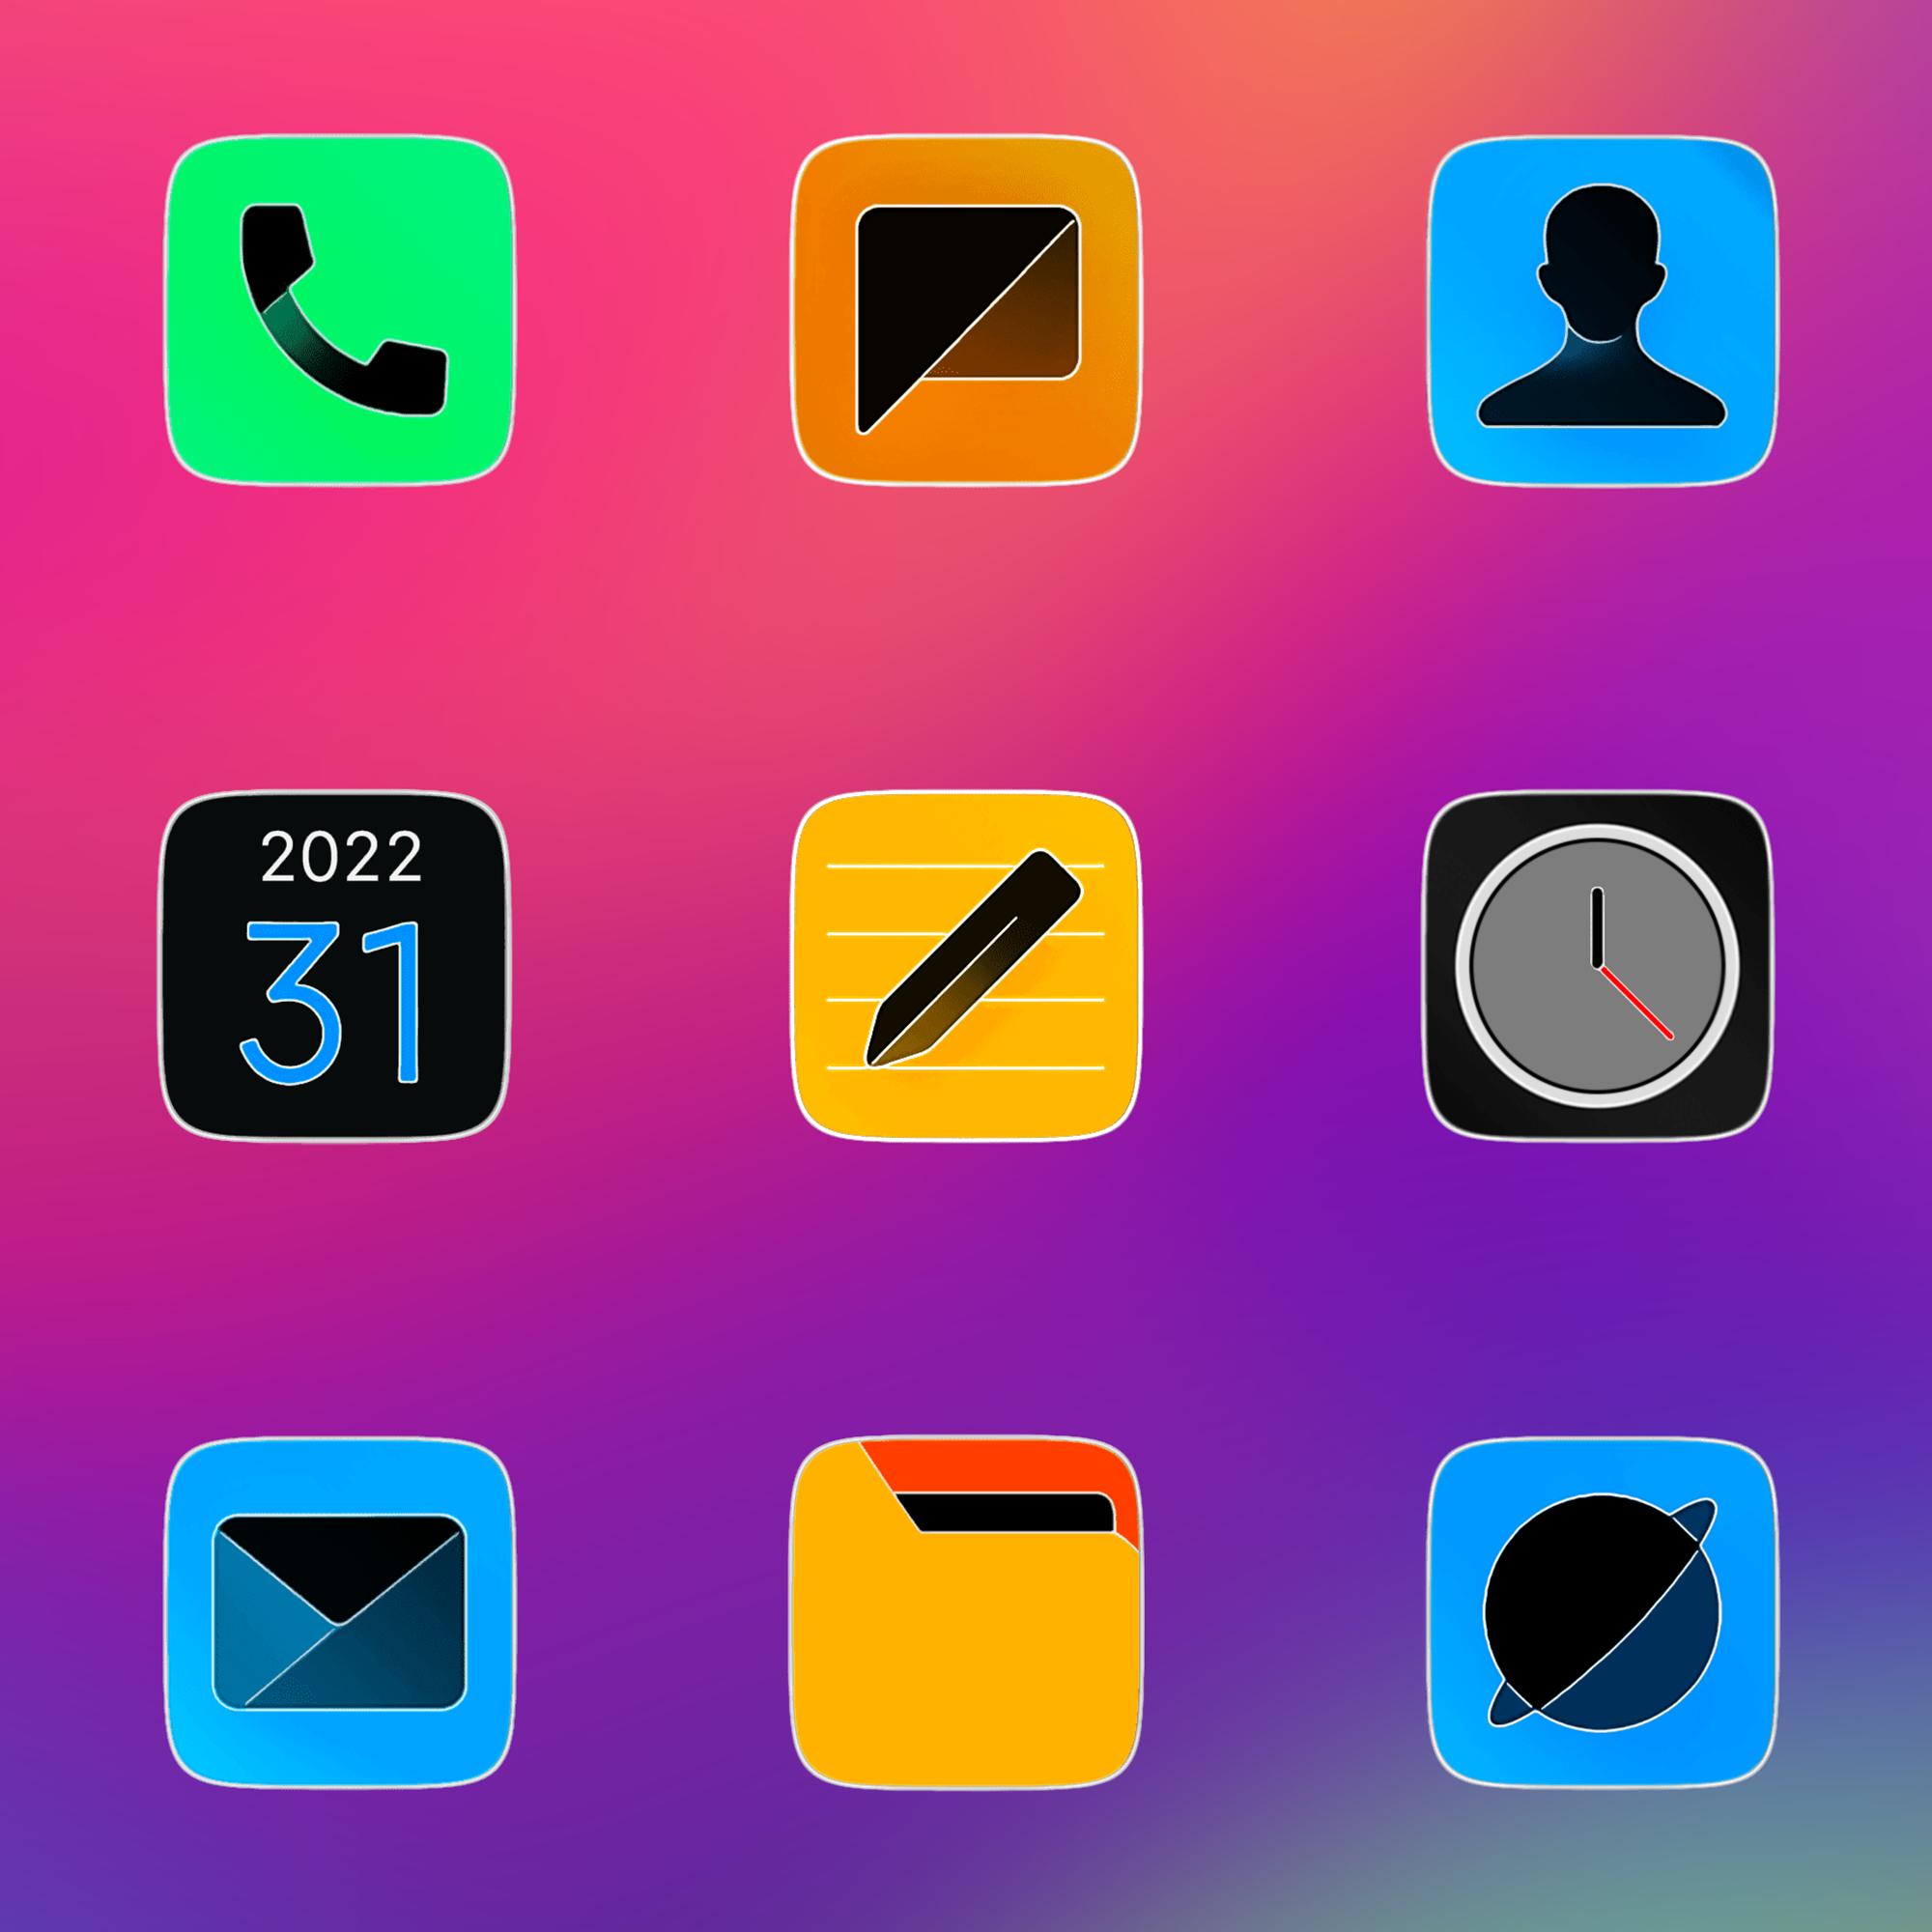 MIUI 13 icon Pack. One UI 5 icons. Miui icon pack